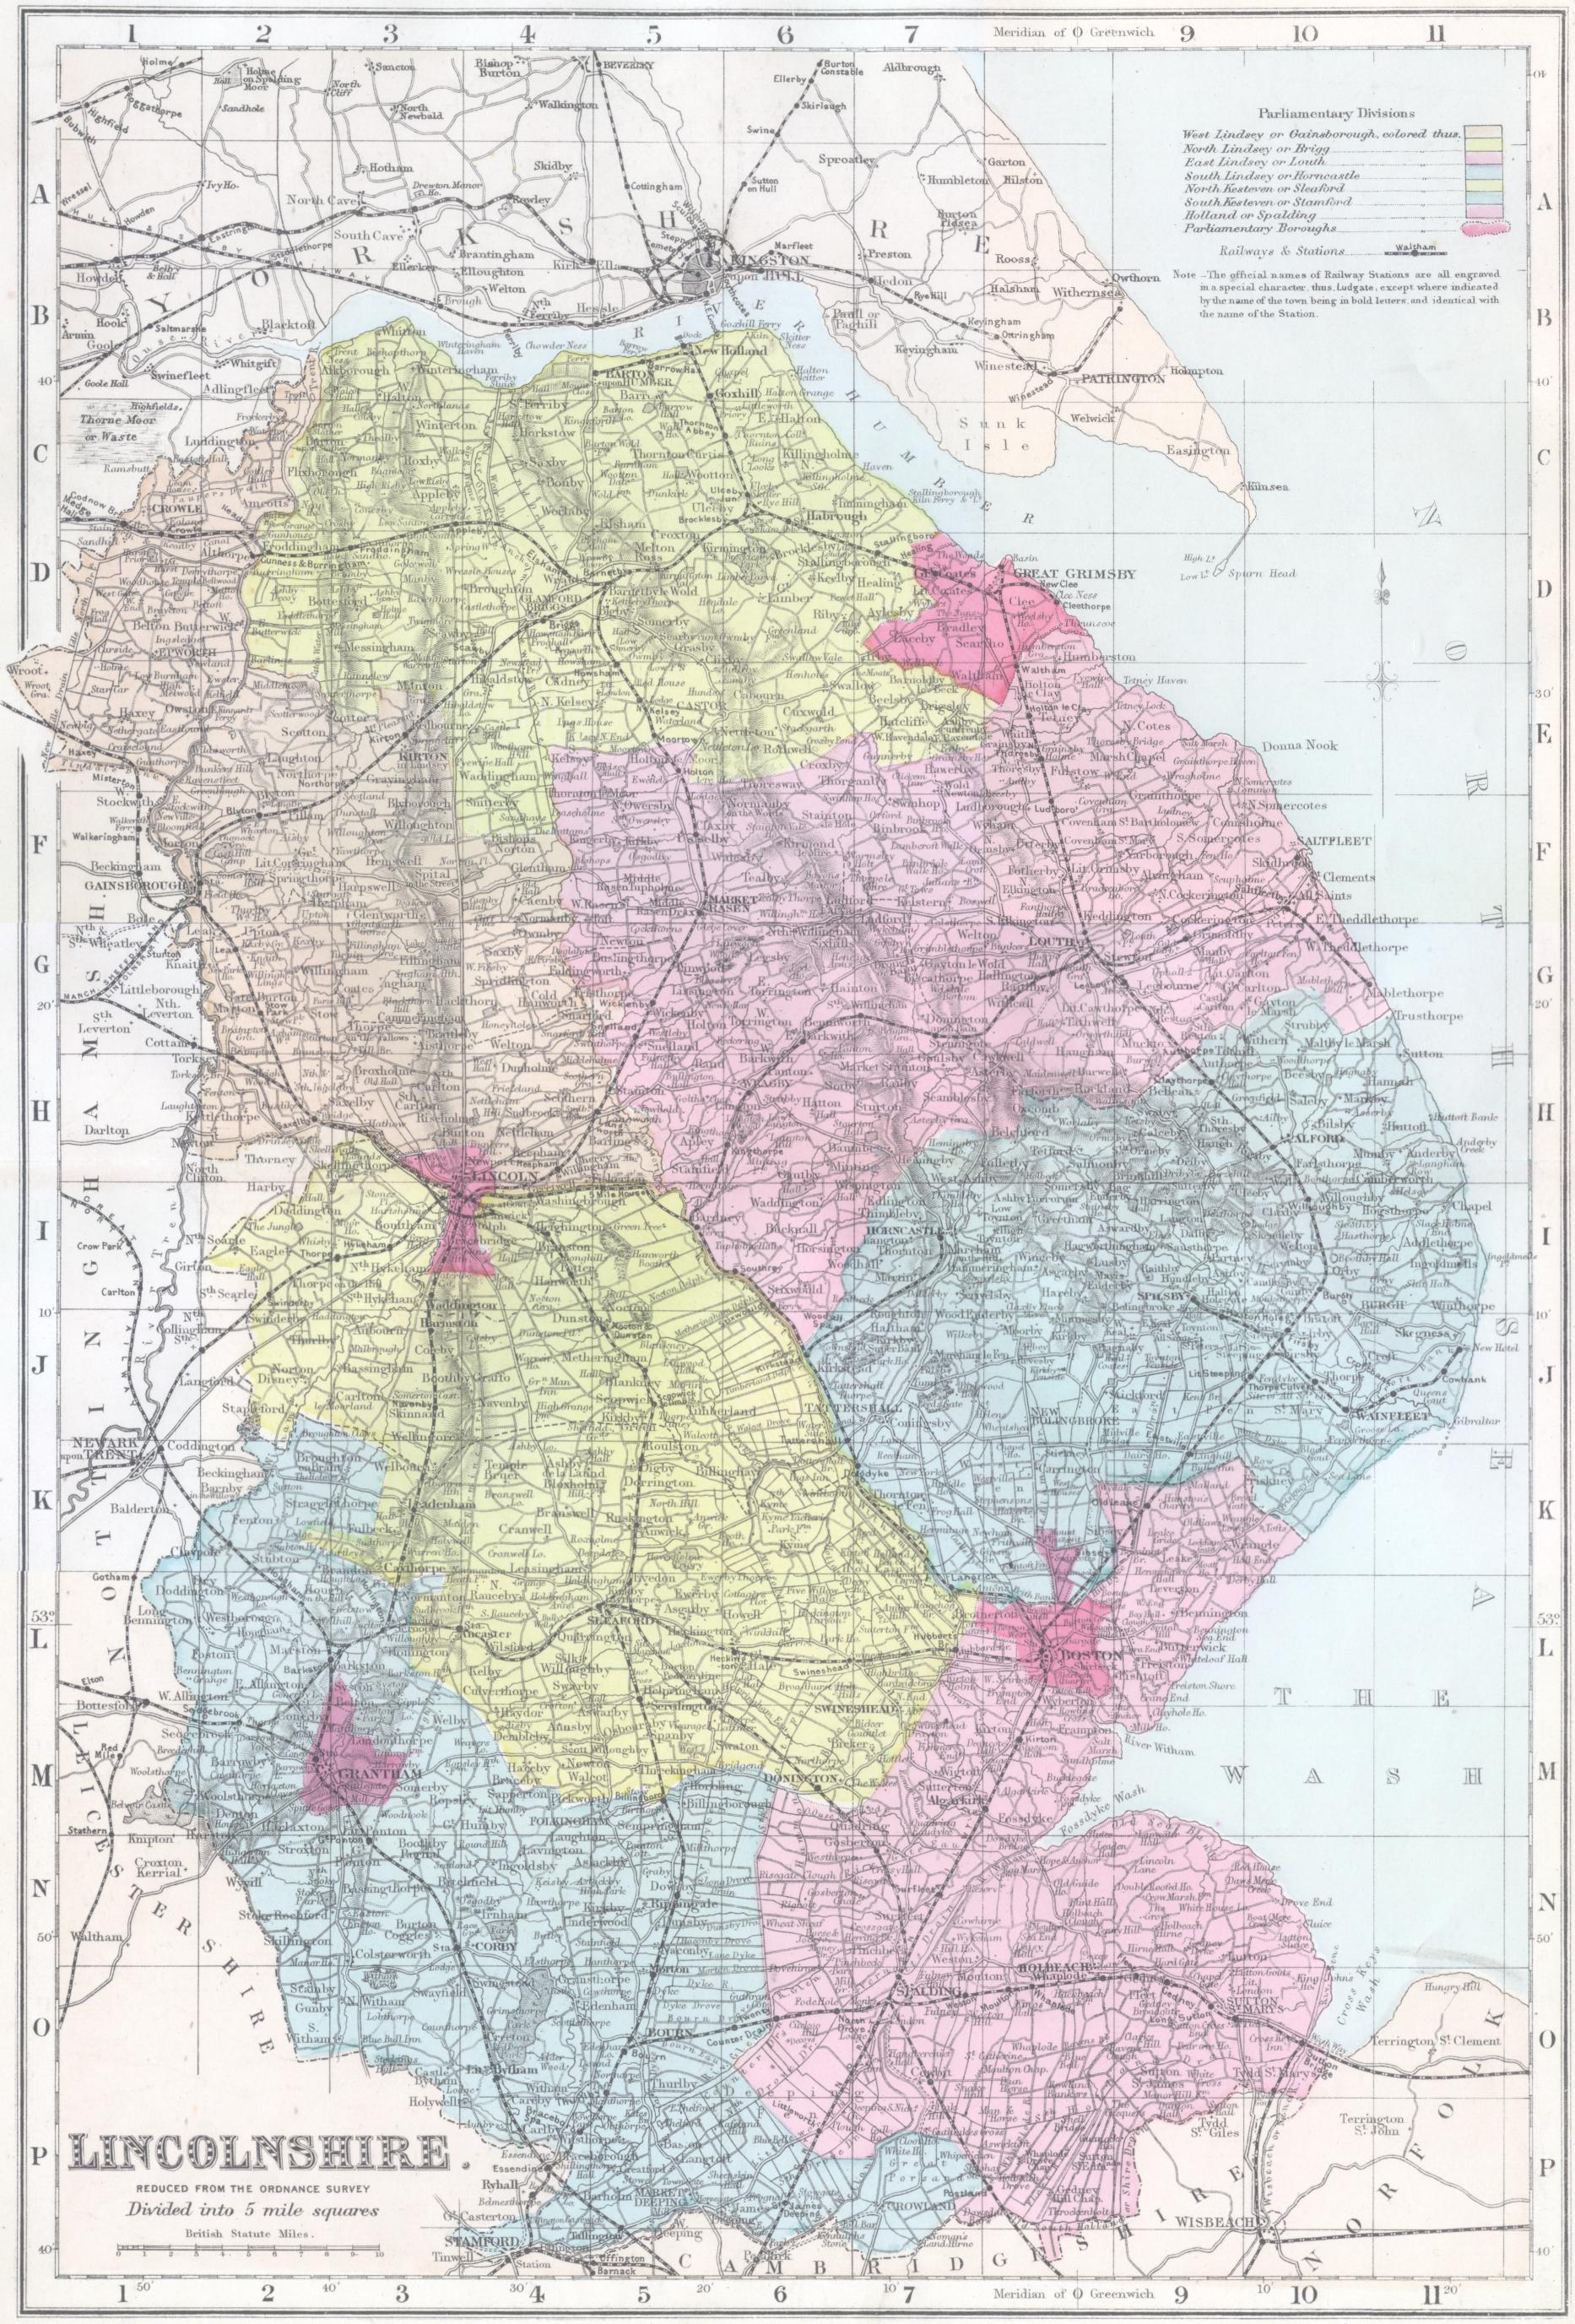 Lincolnshire in the 1880s